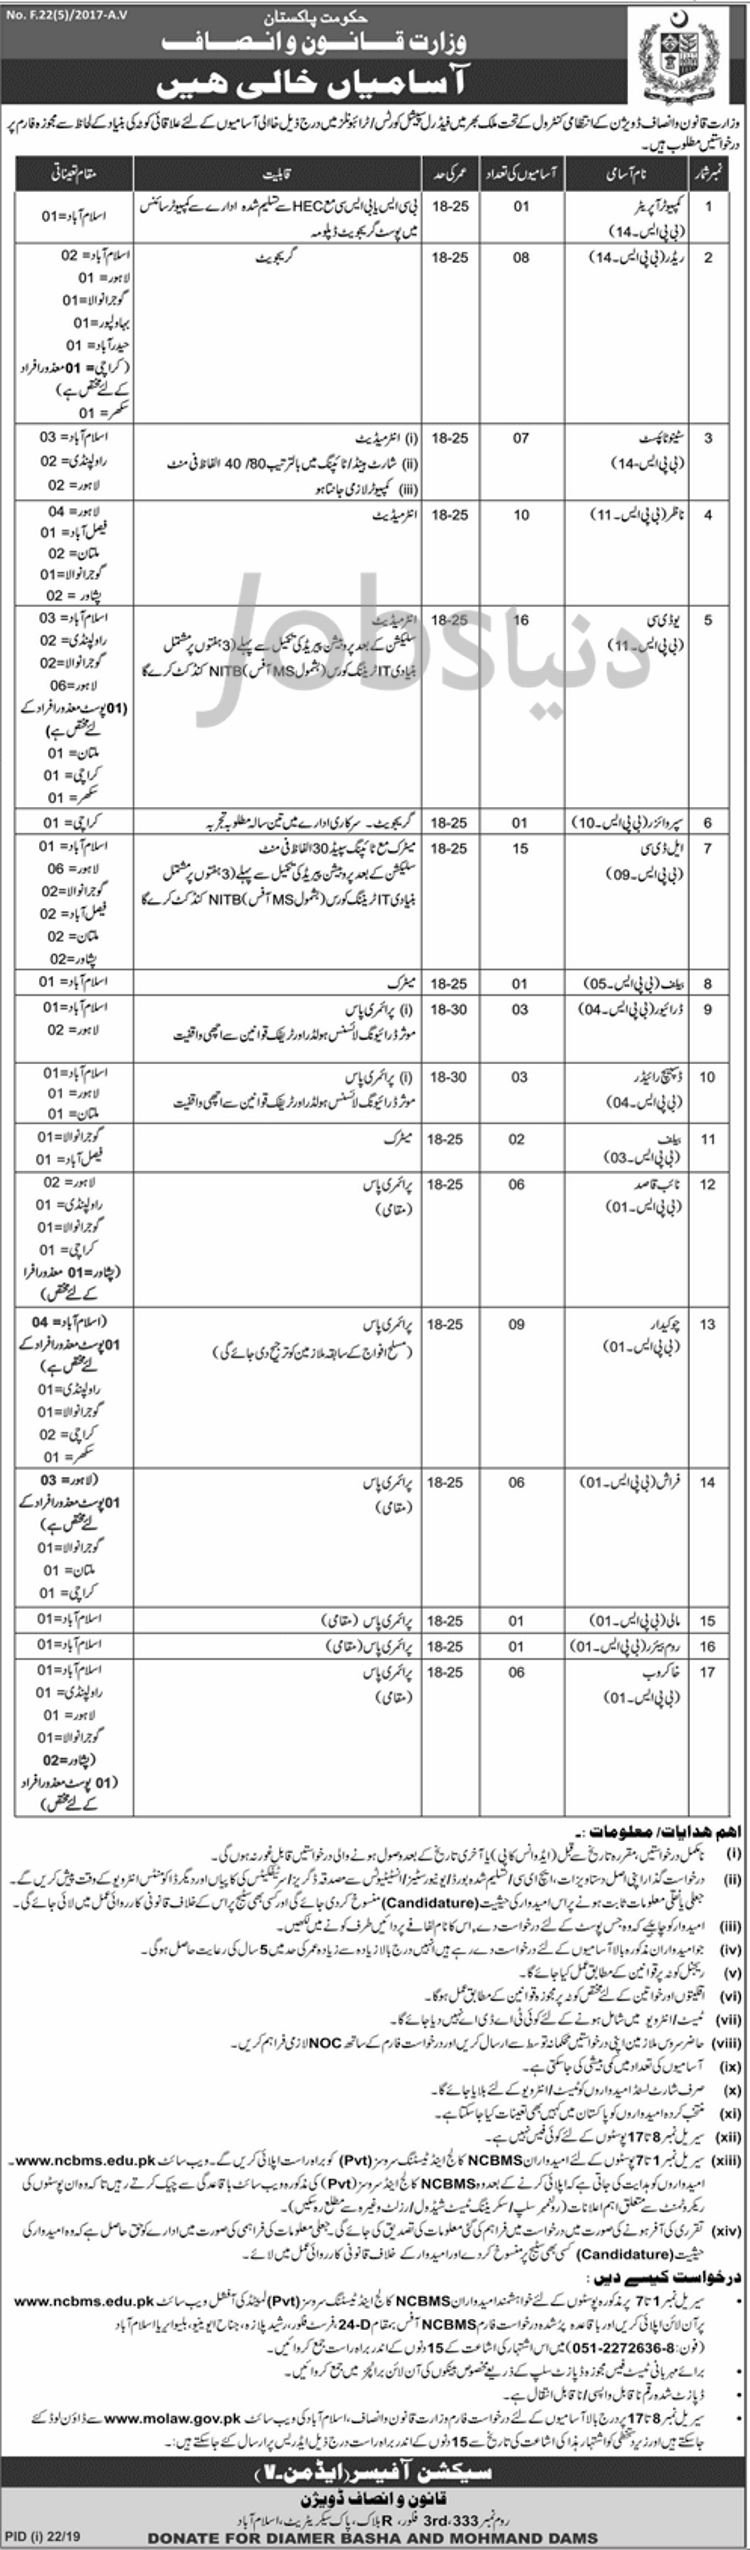 Ministry Of Law & Justice Pakistan Jobs 2019 For 96+ Stenographers, Computer Operators, Clerks, Supervisors & Other